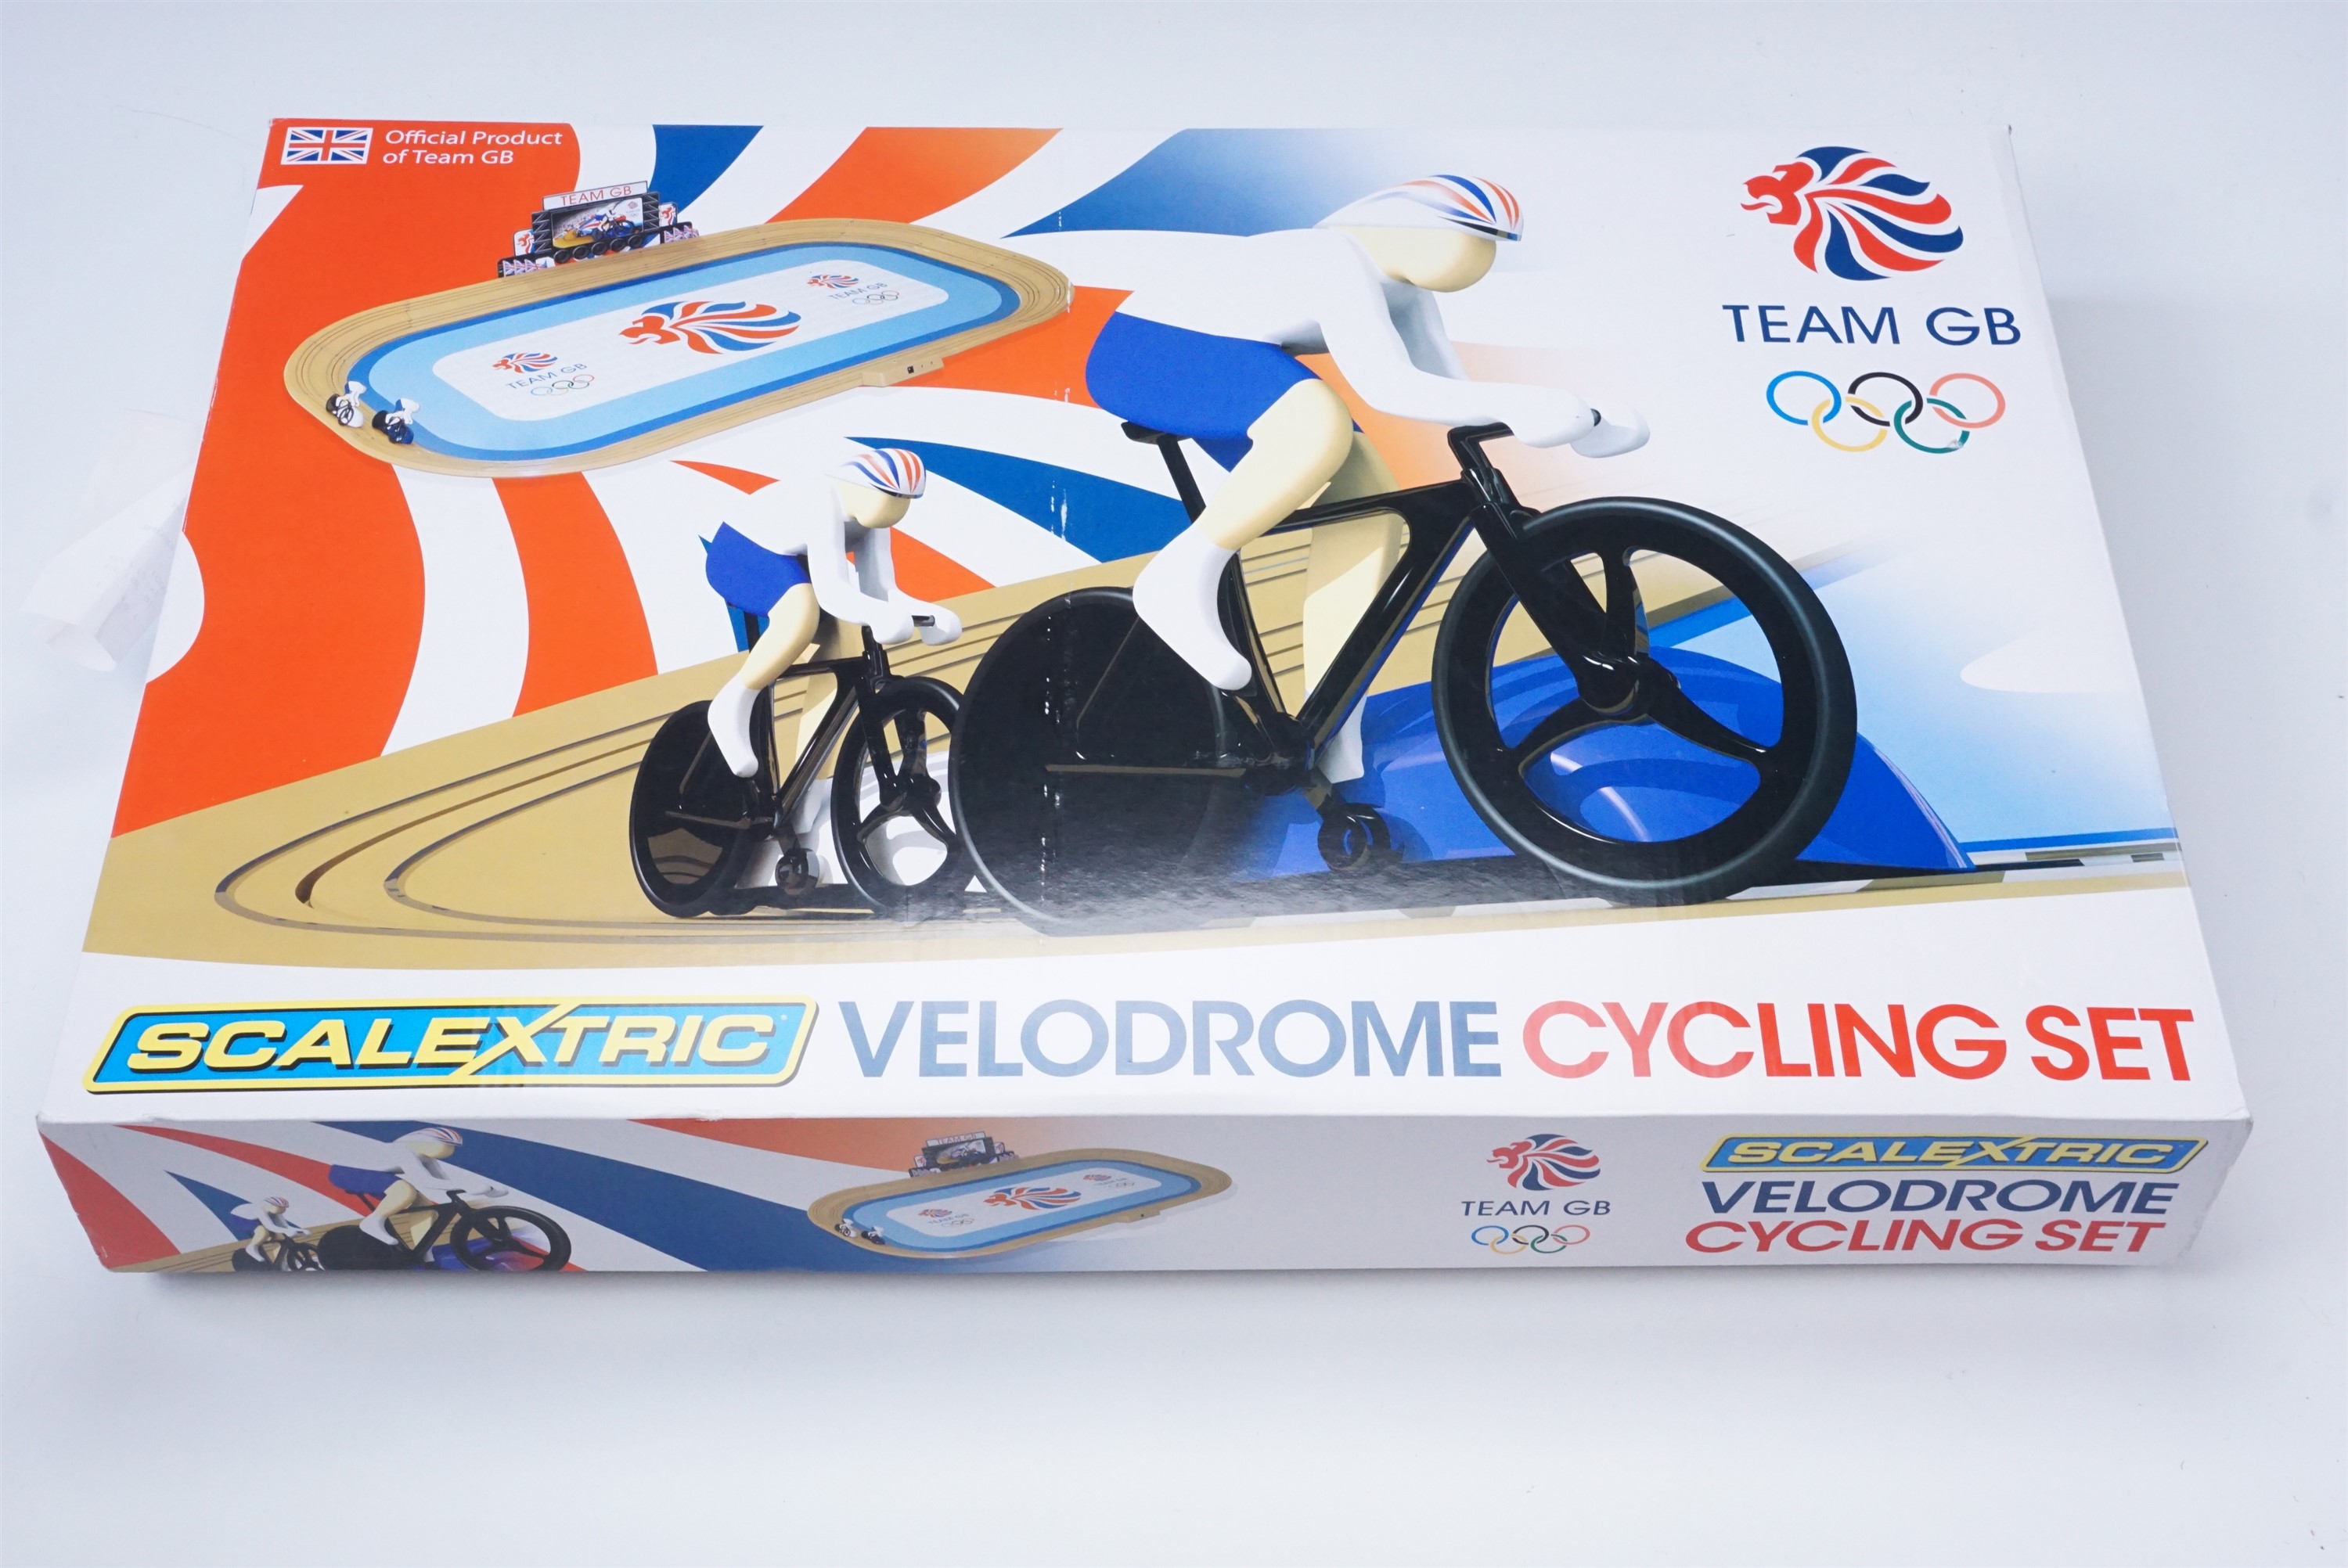 A Scalextric "Team GB Velodrome Cycling Set"